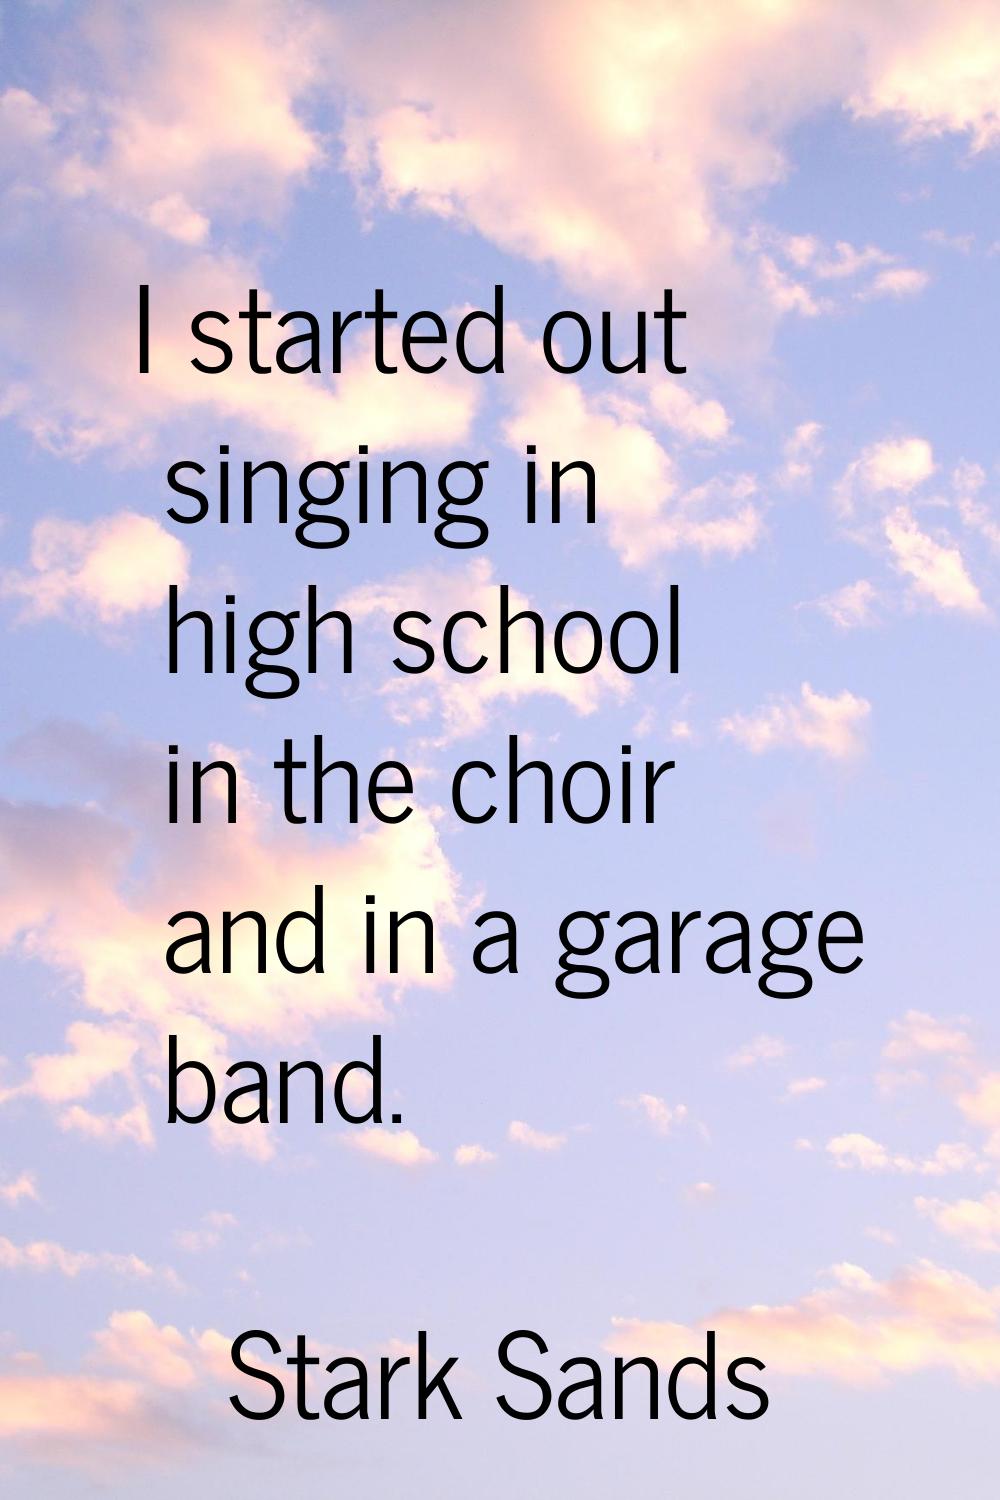 I started out singing in high school in the choir and in a garage band.